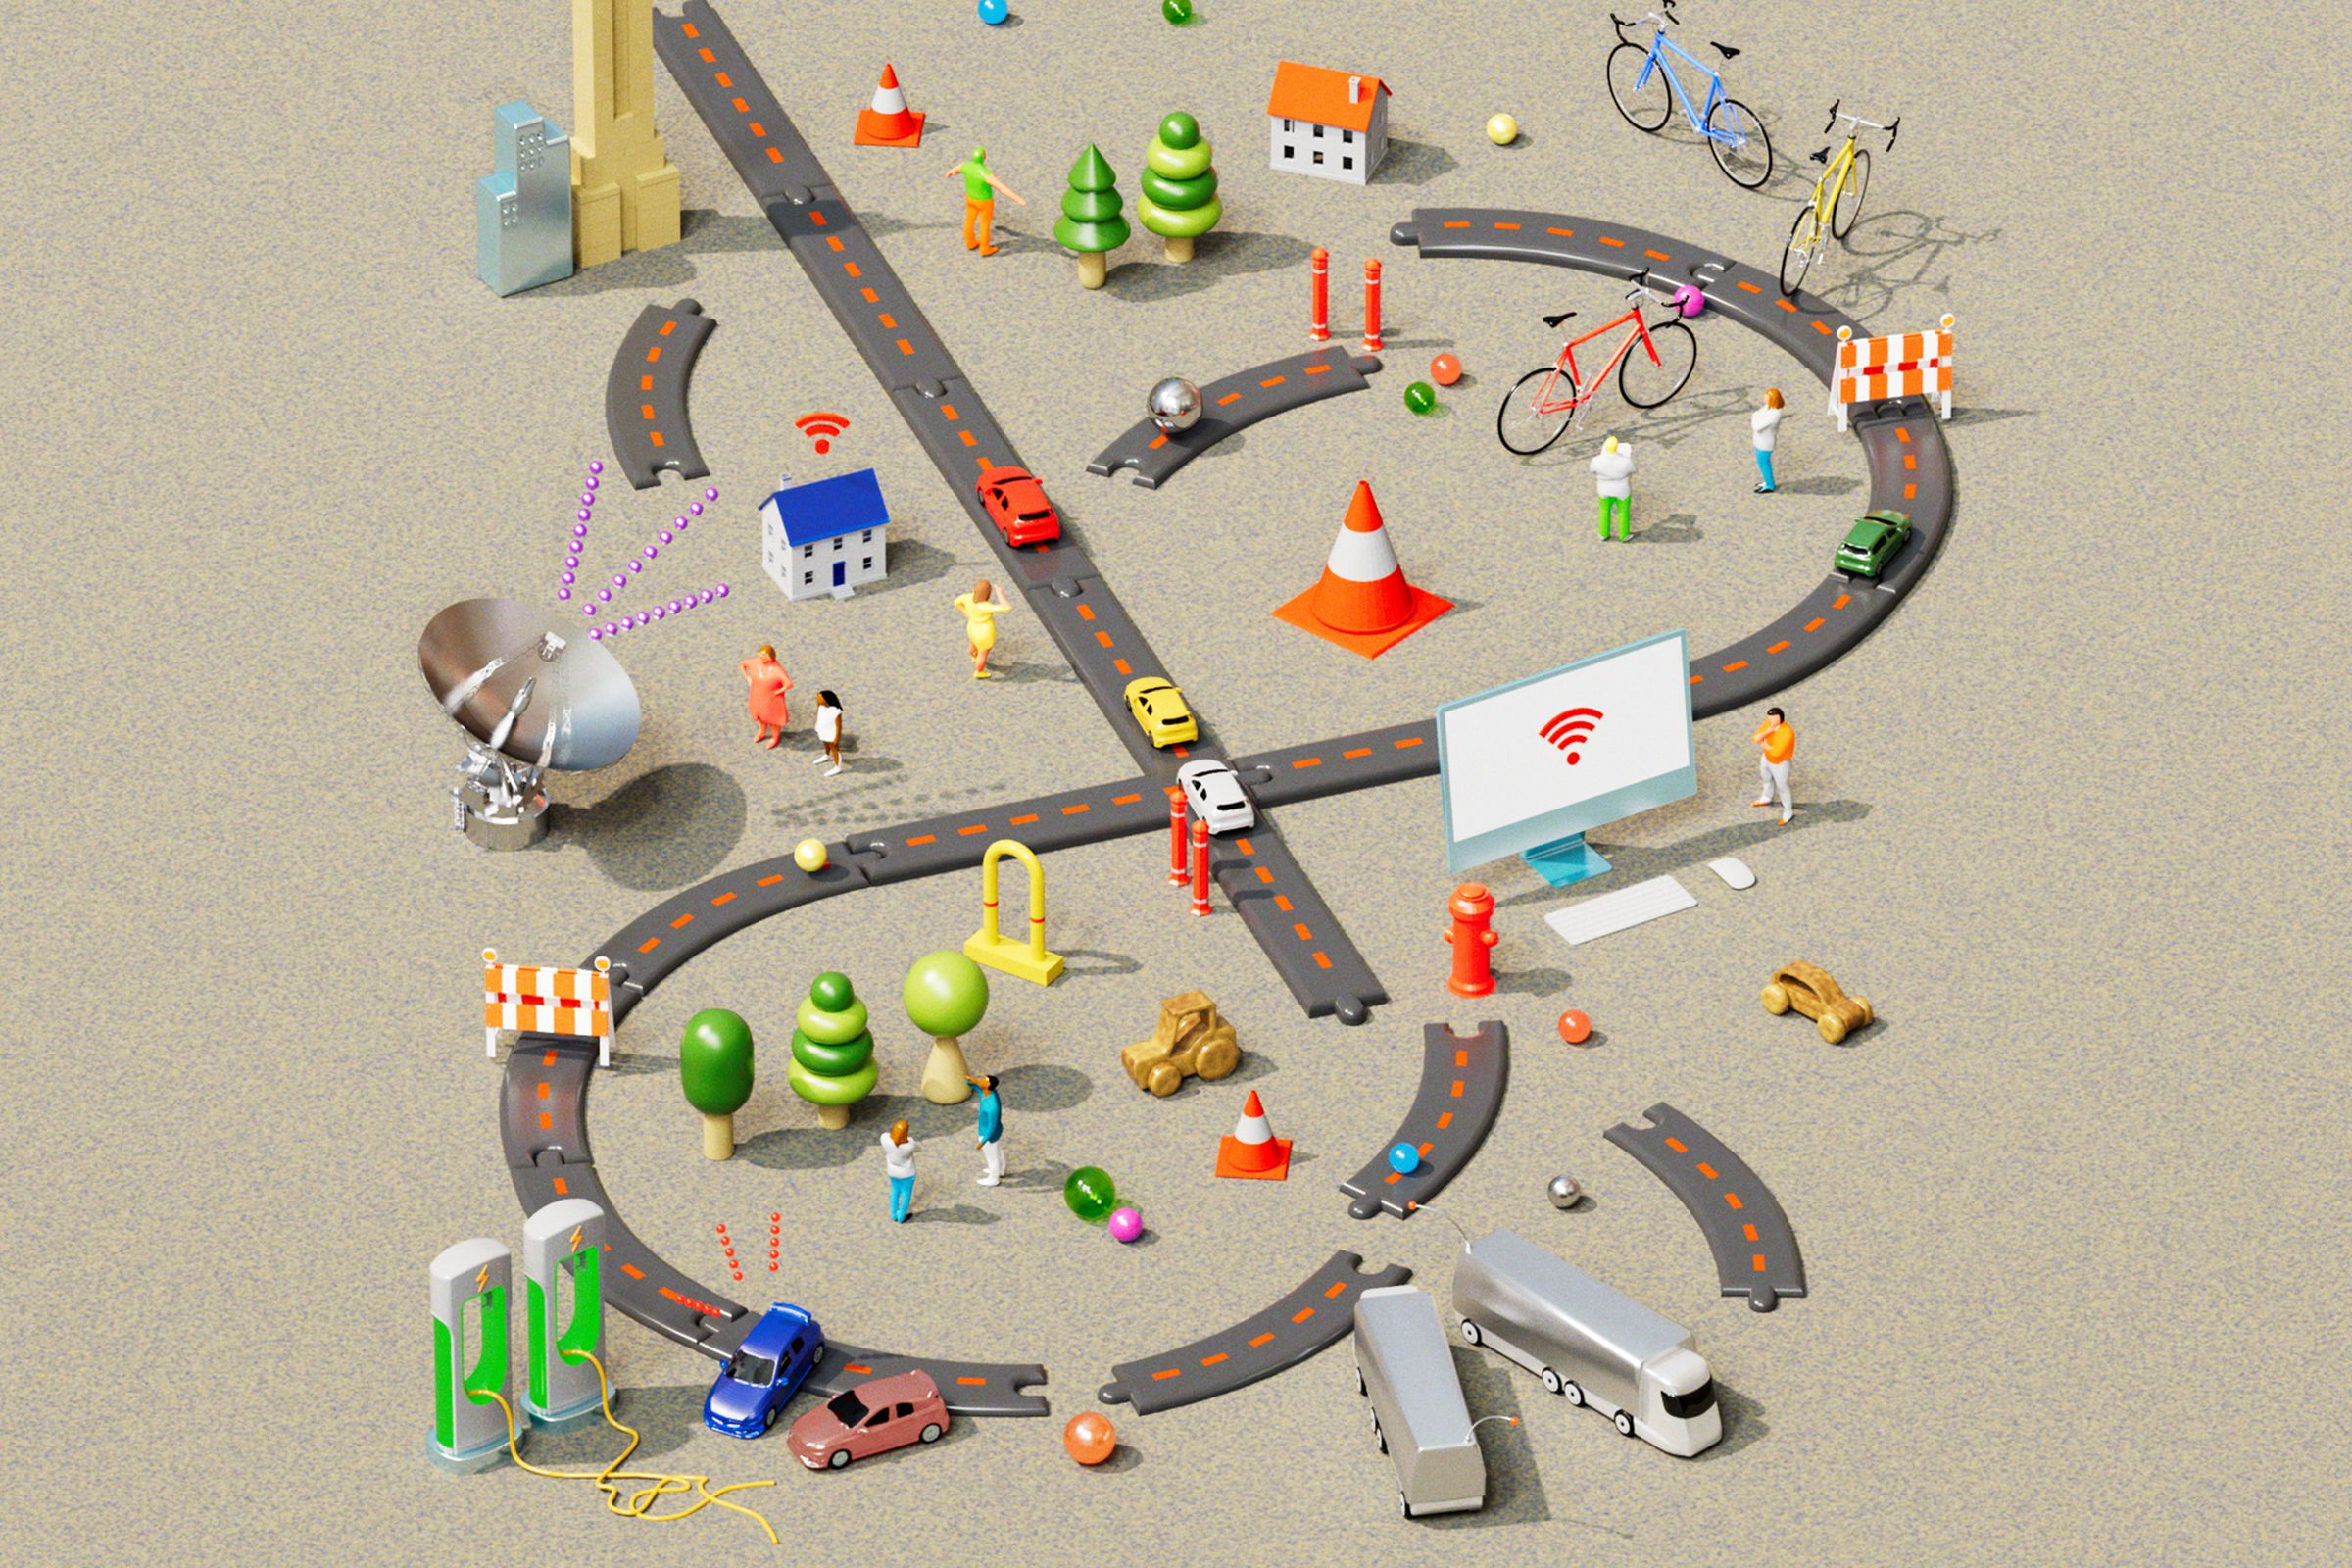 3D illustration of a sprawling scene of toy trucks, cars, electric chargers, tiny people, bikes, and satellites among a road playset that has yet to be put together properly.